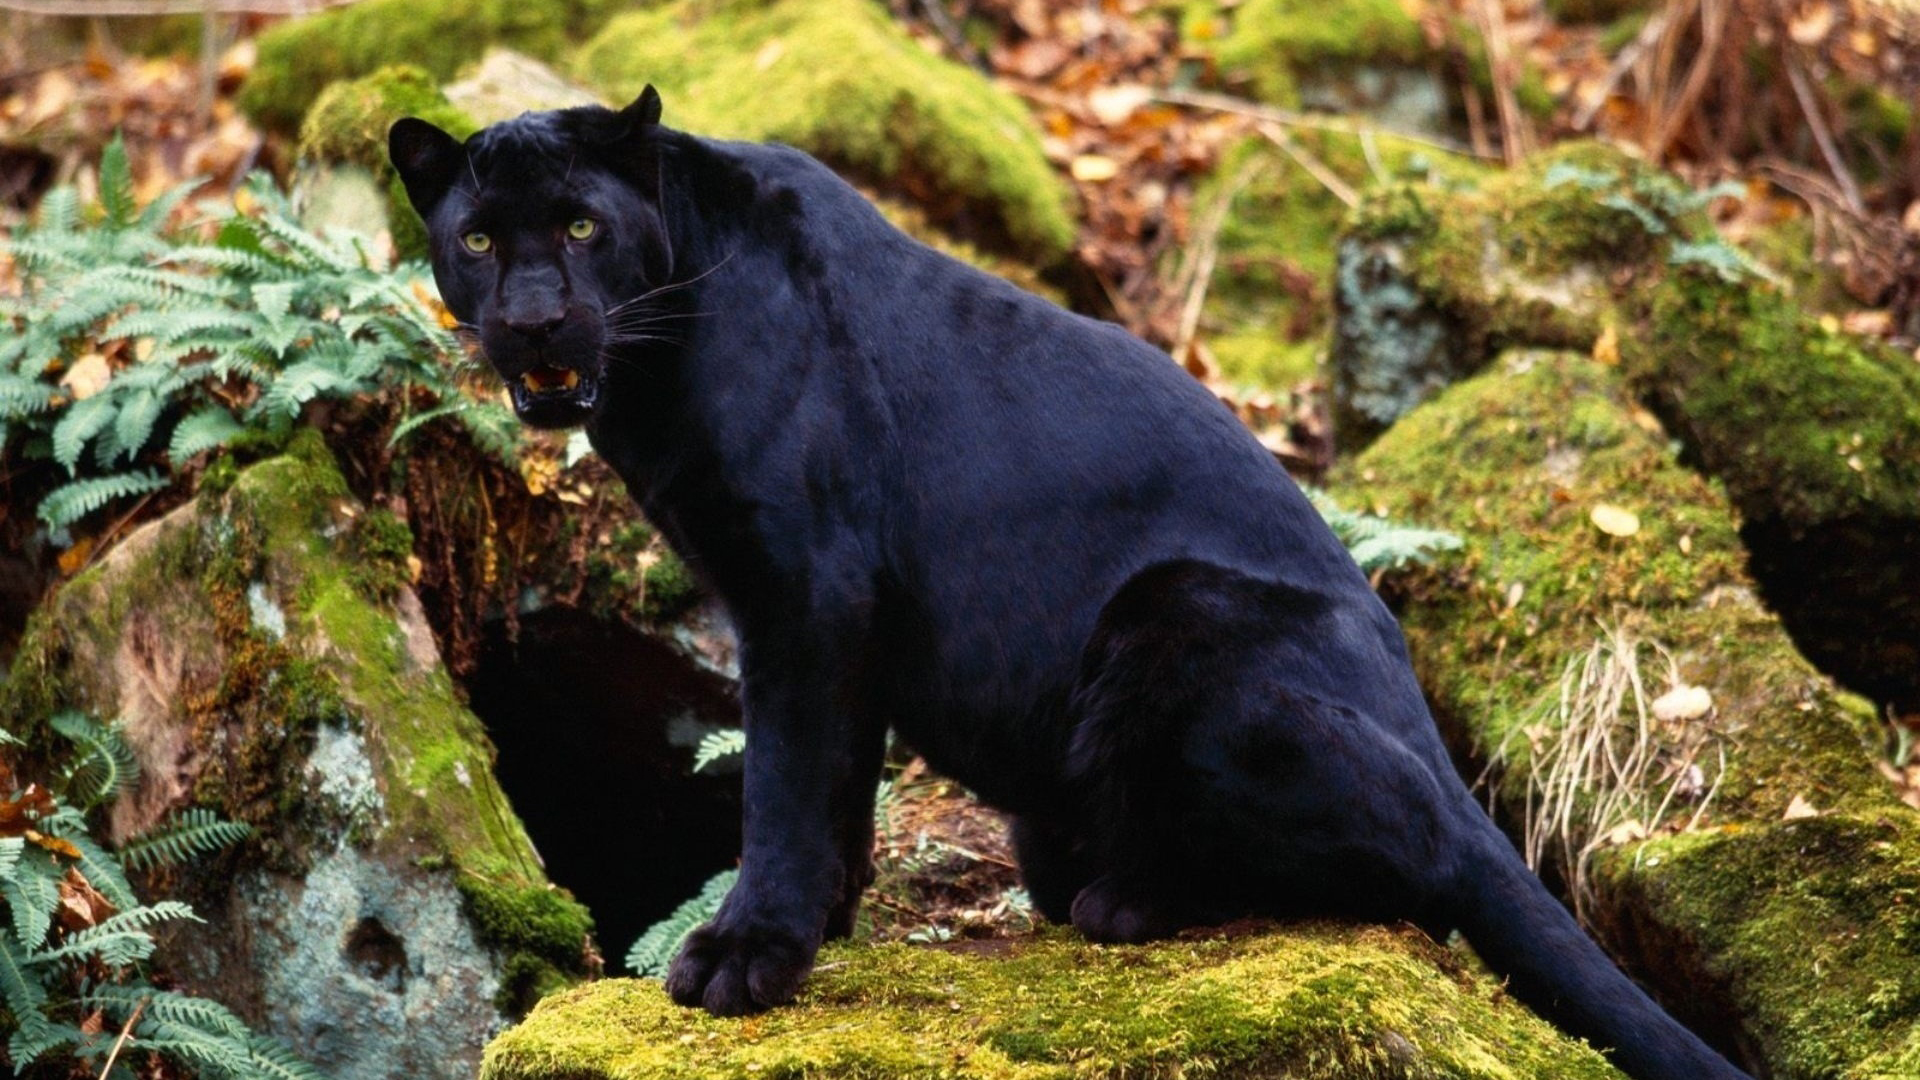 Black Panther Is Sitting On Green Algae Covered Stone In Green Plants Wallpaper 2K Green